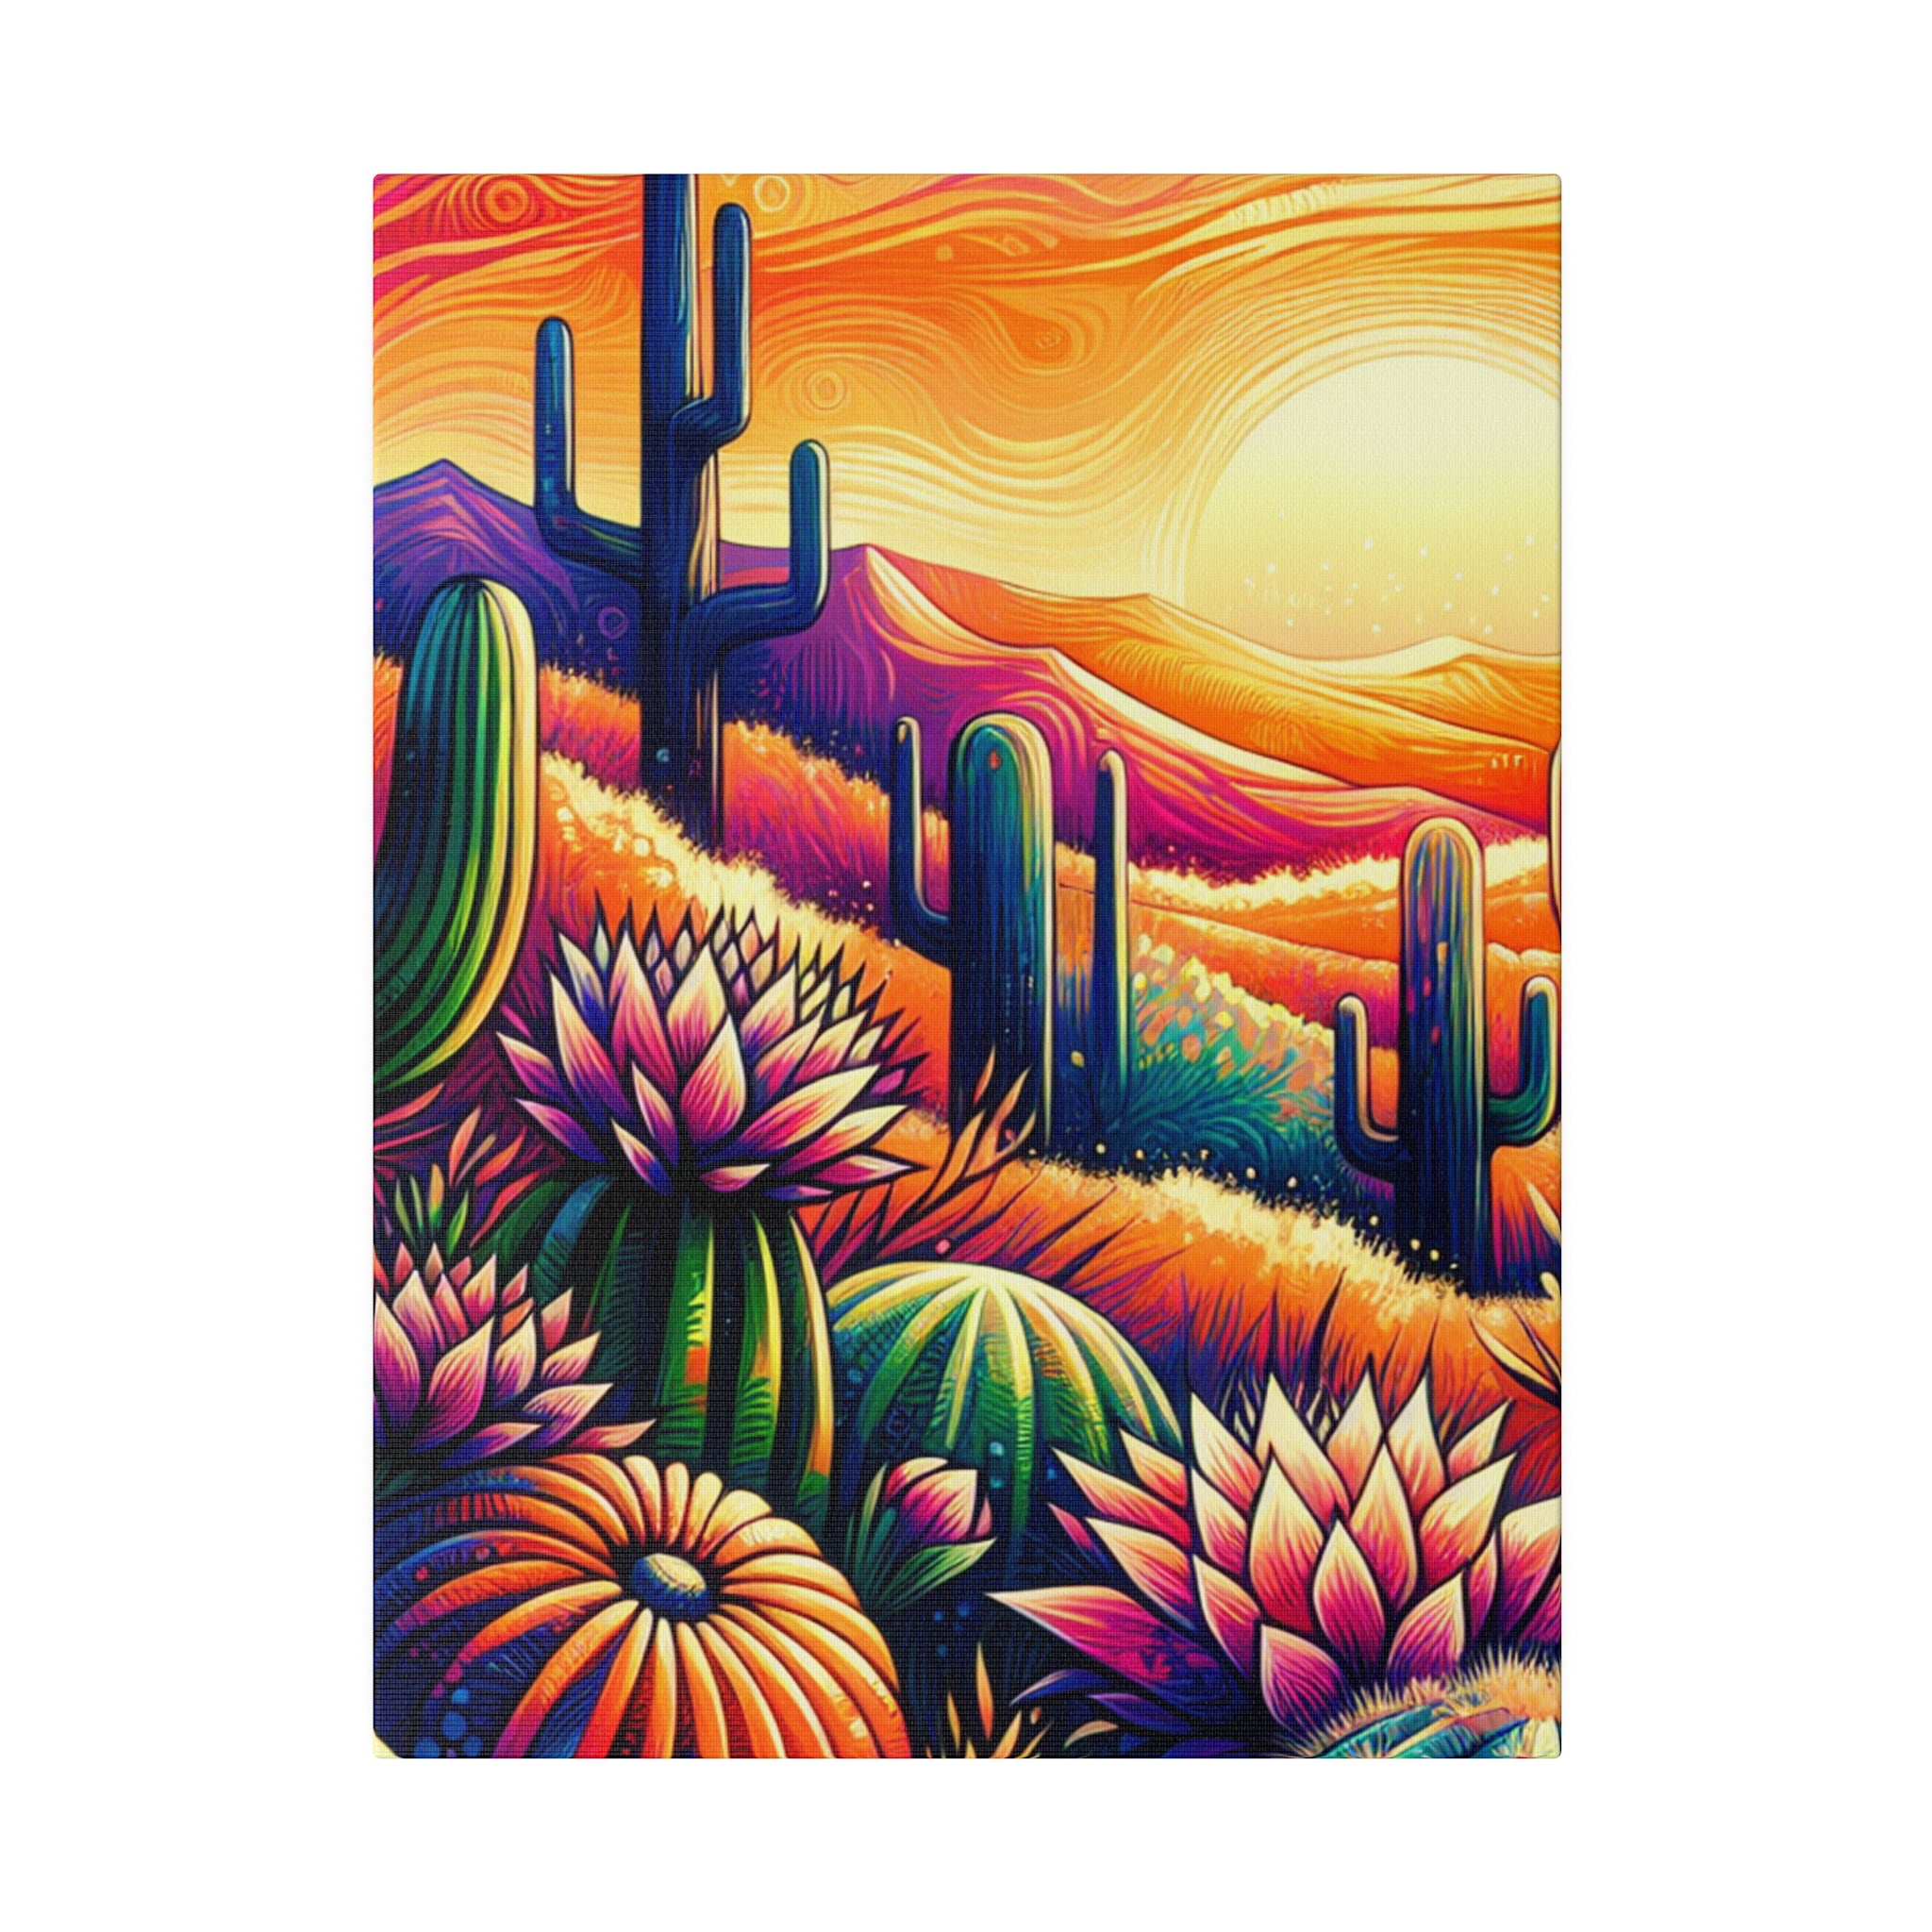 "Cactus Mirage: Canvas Wall Art Collection"